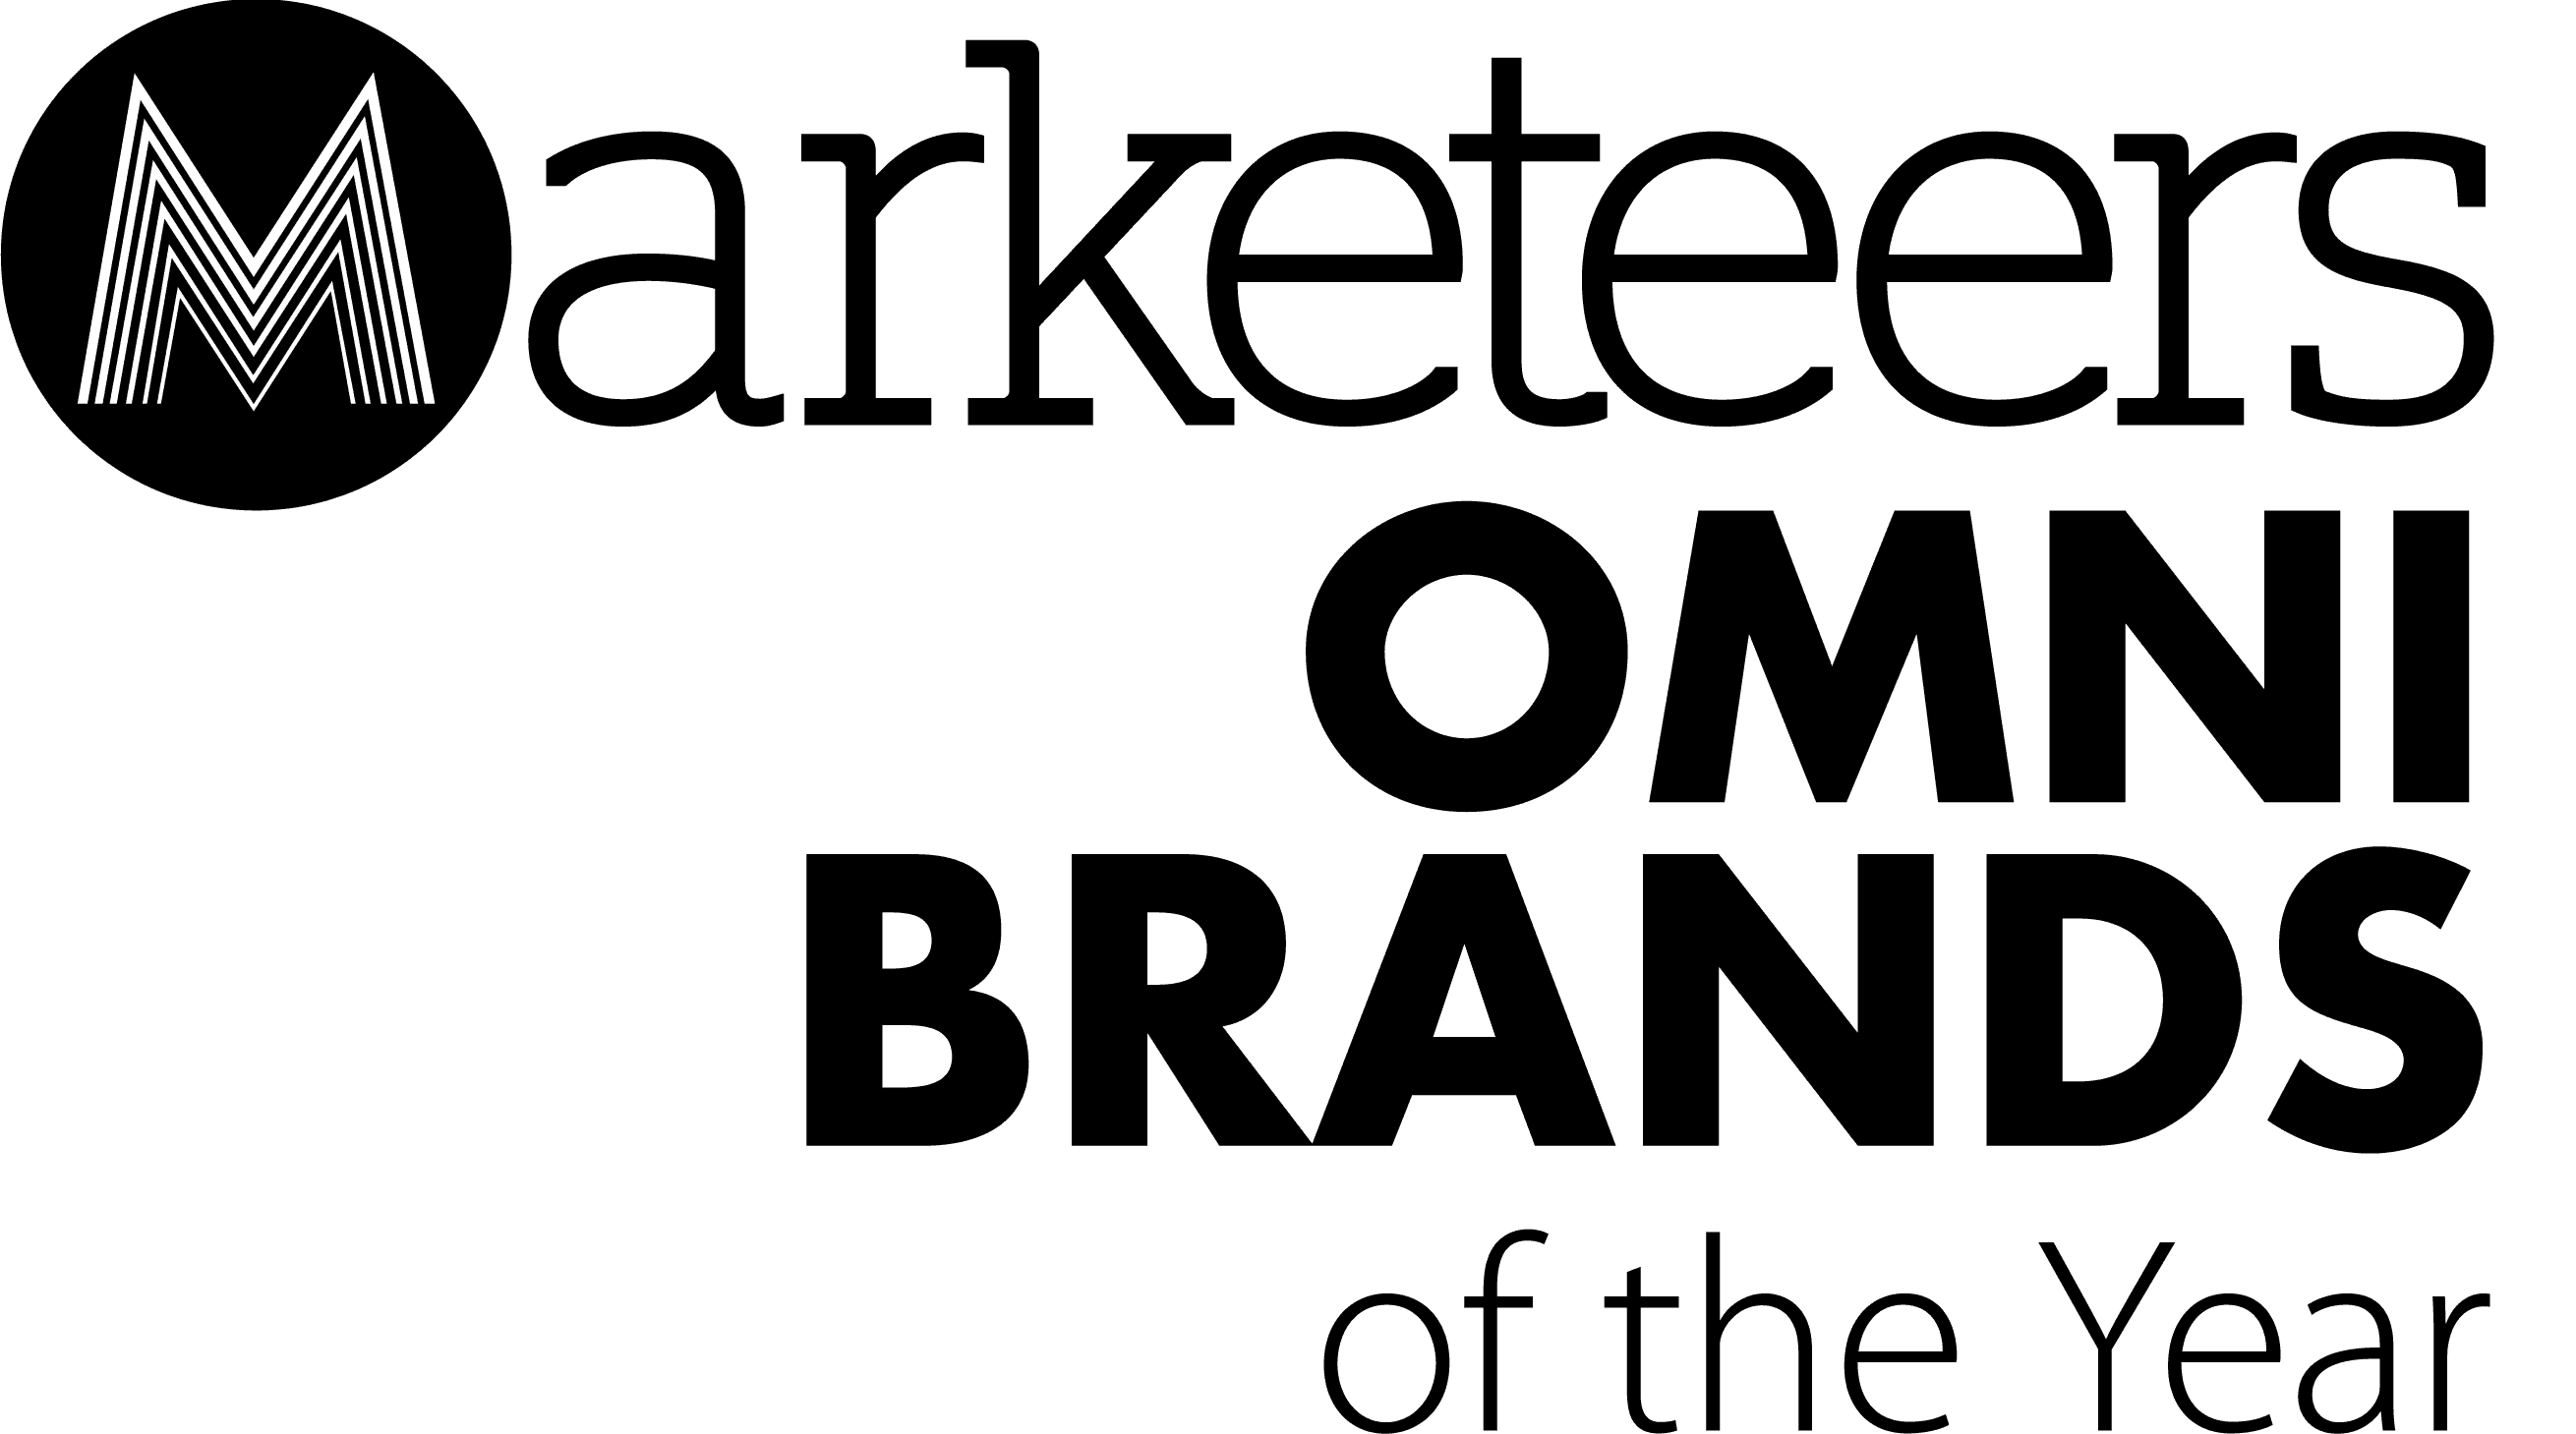 Marketeers Omni-Brands of the Year